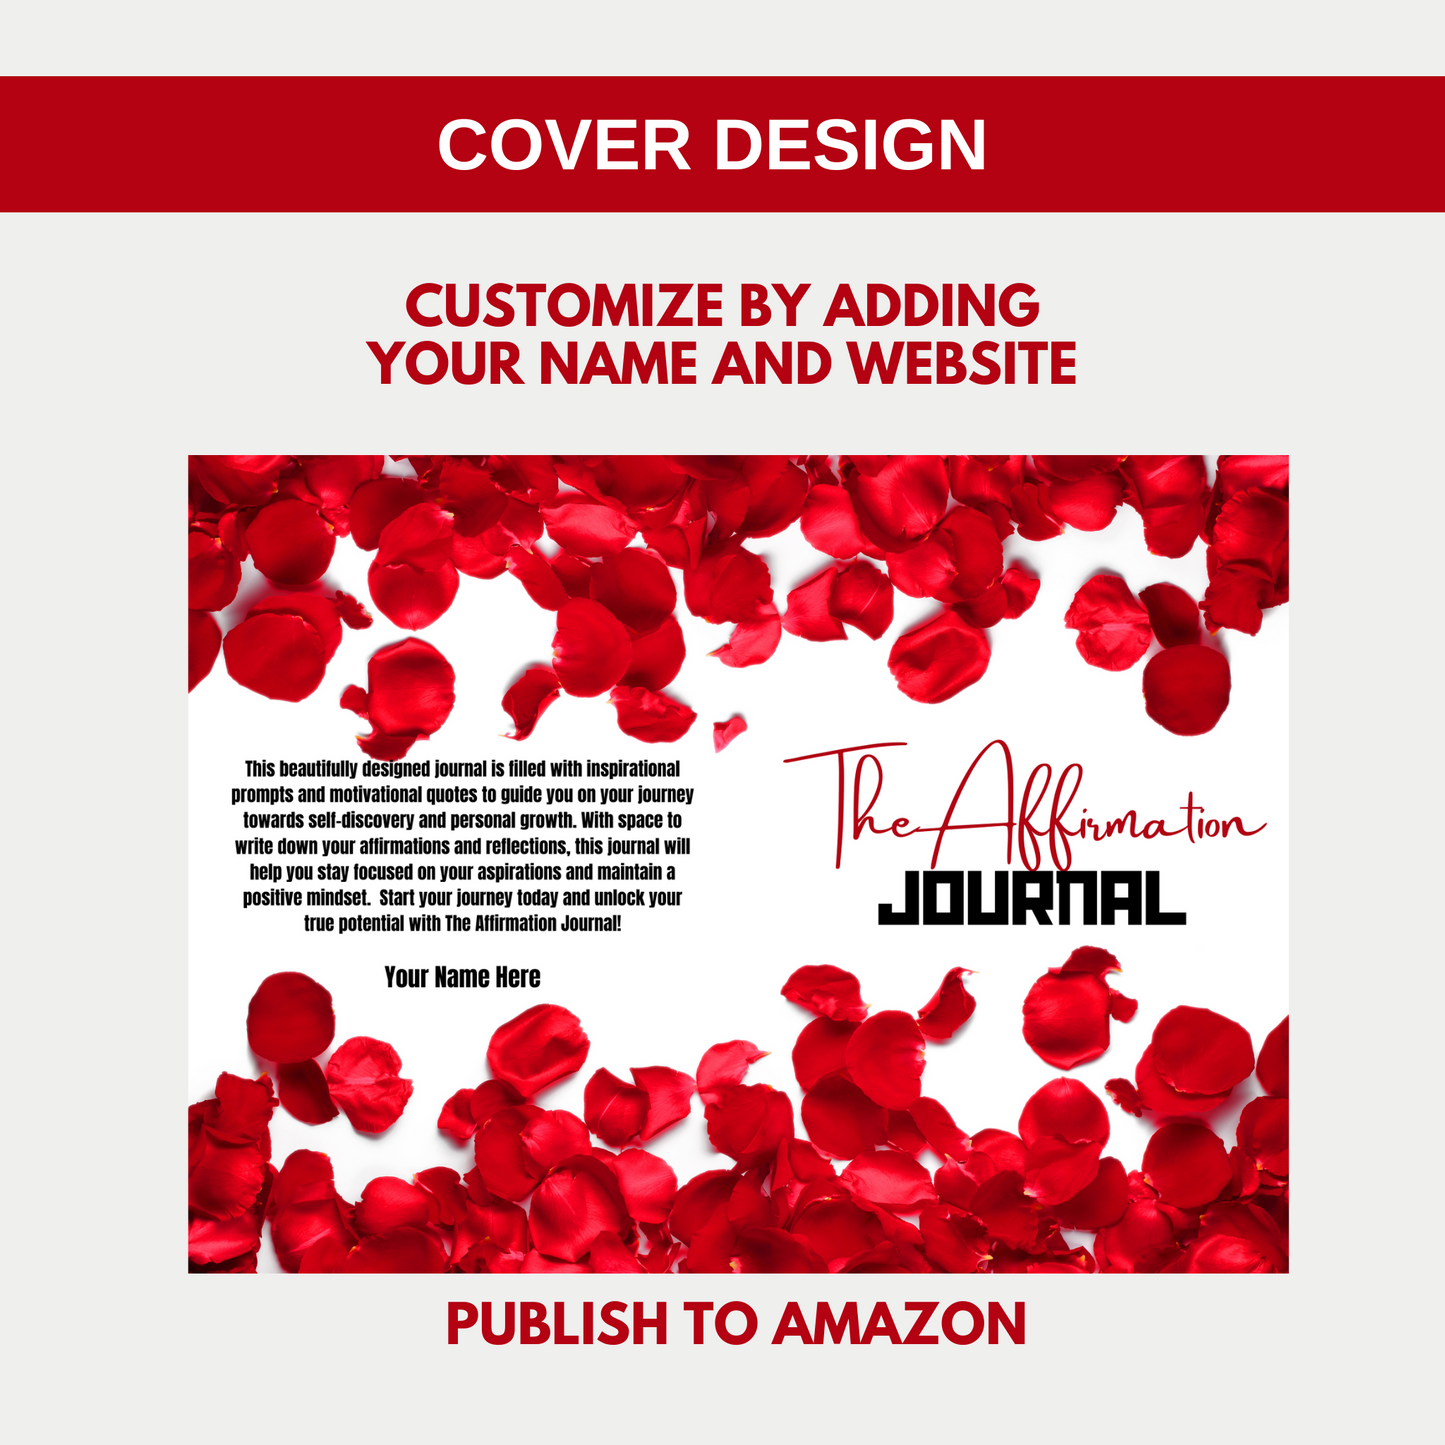 My Affirmation Journal for KDP Amazon